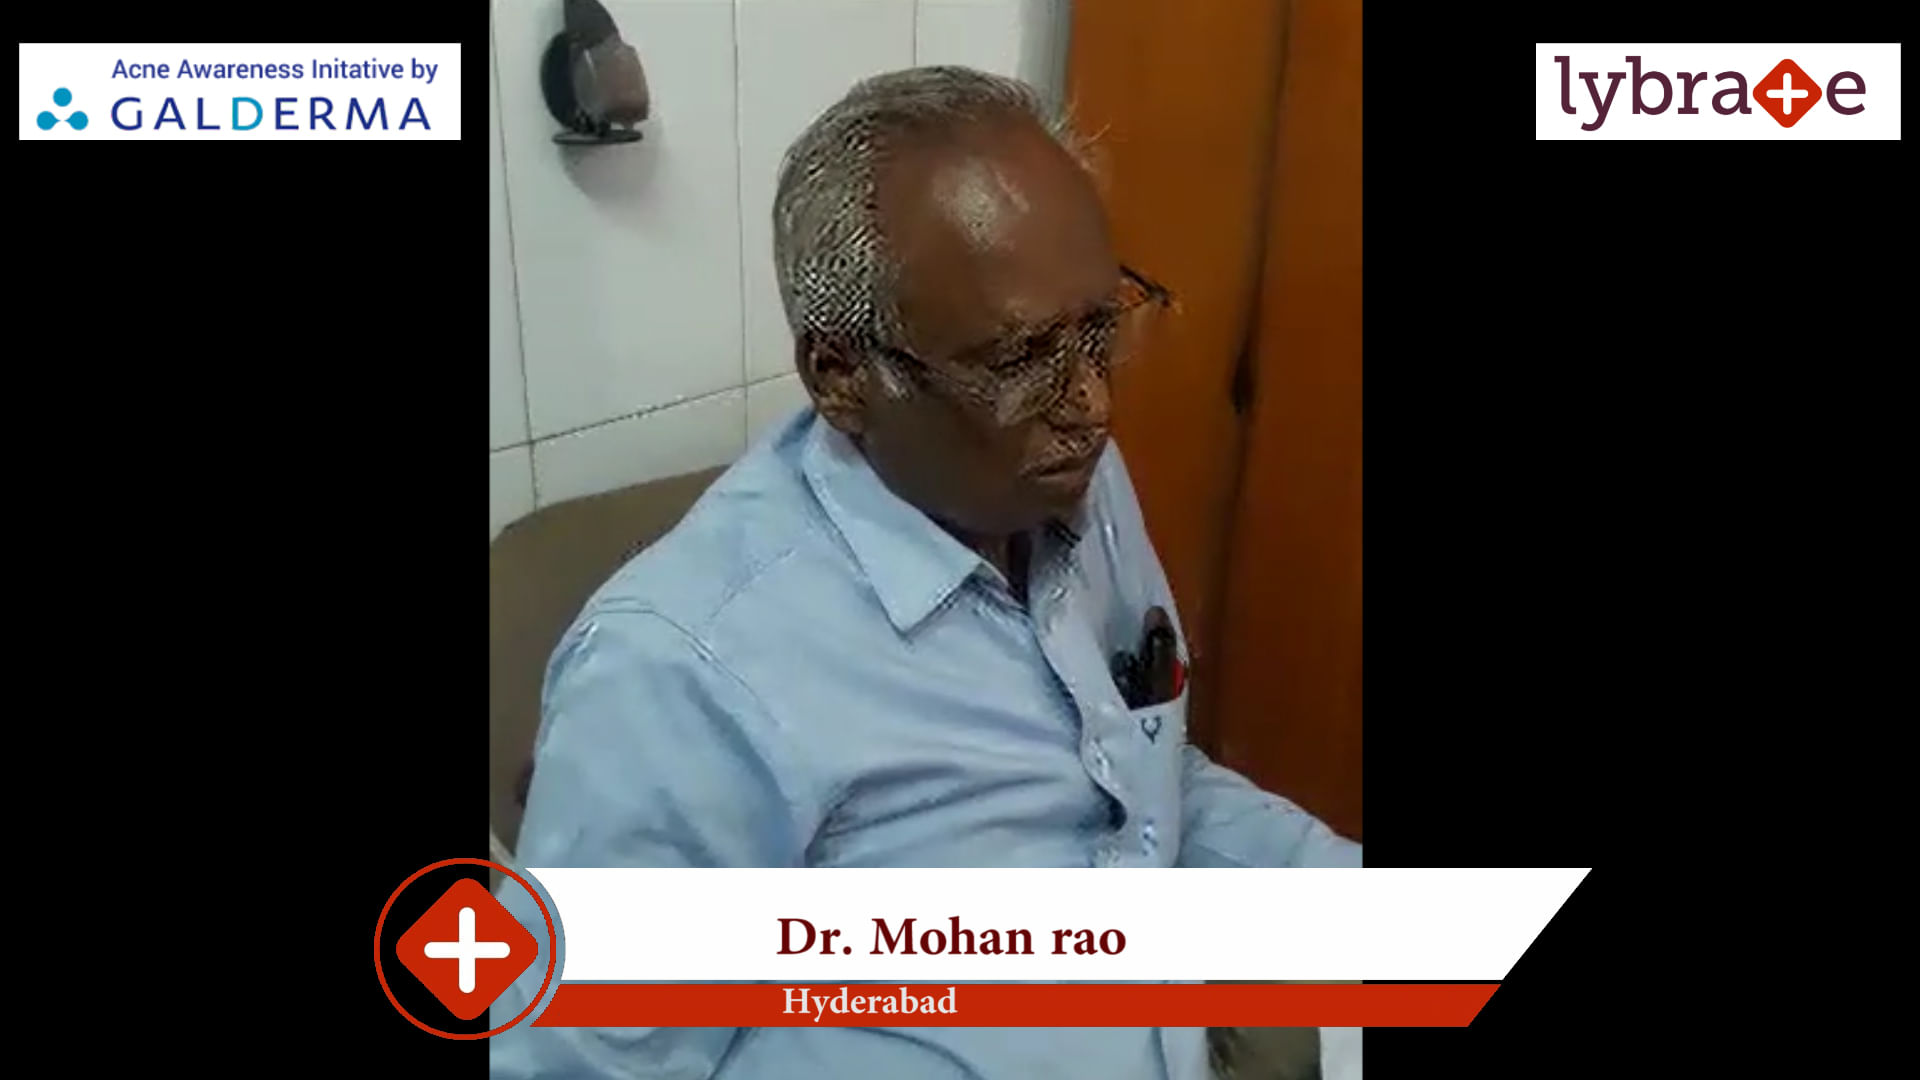 Lybrate | Dr. Mohan Rao speaks on IMPORTANCE OF TREATING ACNE EARLY